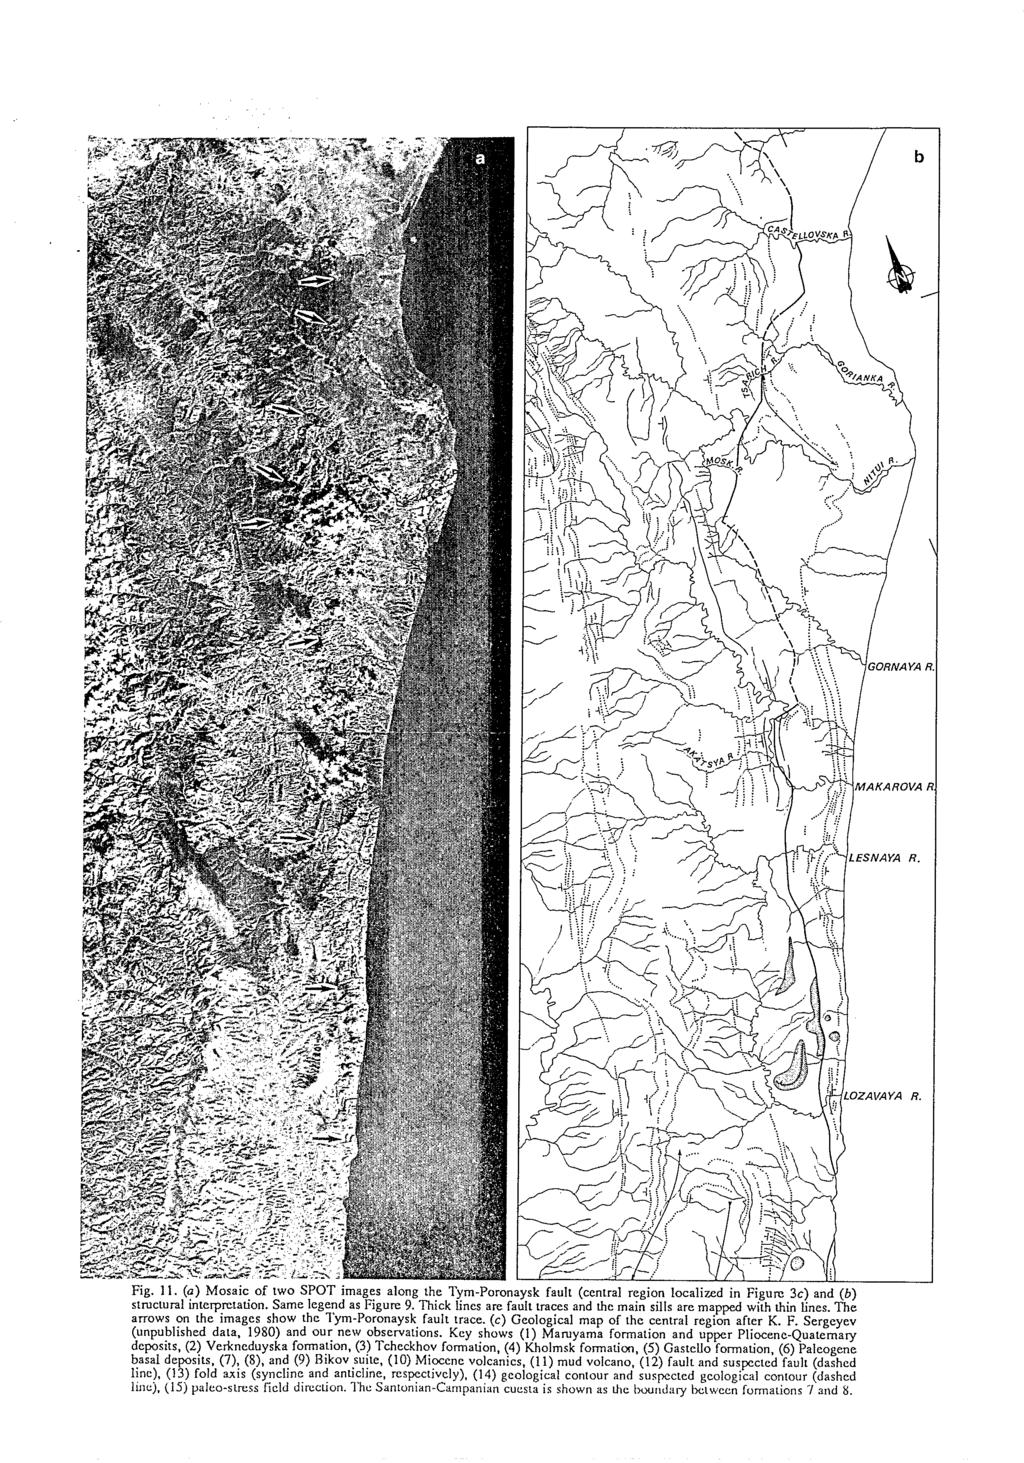 Fig.. (o) Mosaic of two SPOT images along the Tym-Poronaysk fault (central region localized in Figure 3c) and (b) structural interpretation. Same legend as Figure 9.